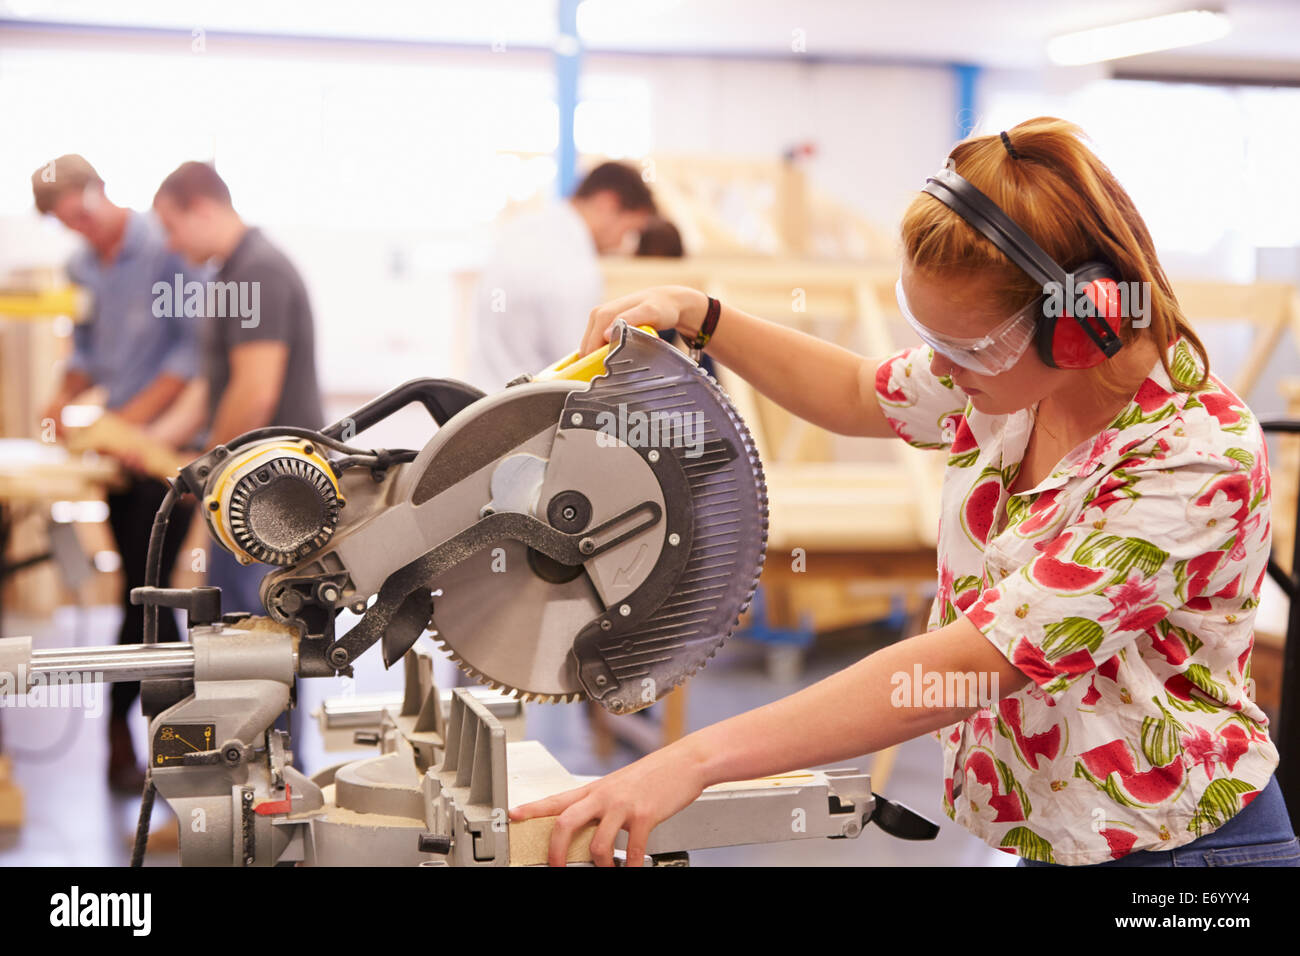 Female Student In Carpentry Class Using Circular Saw Stock Photo